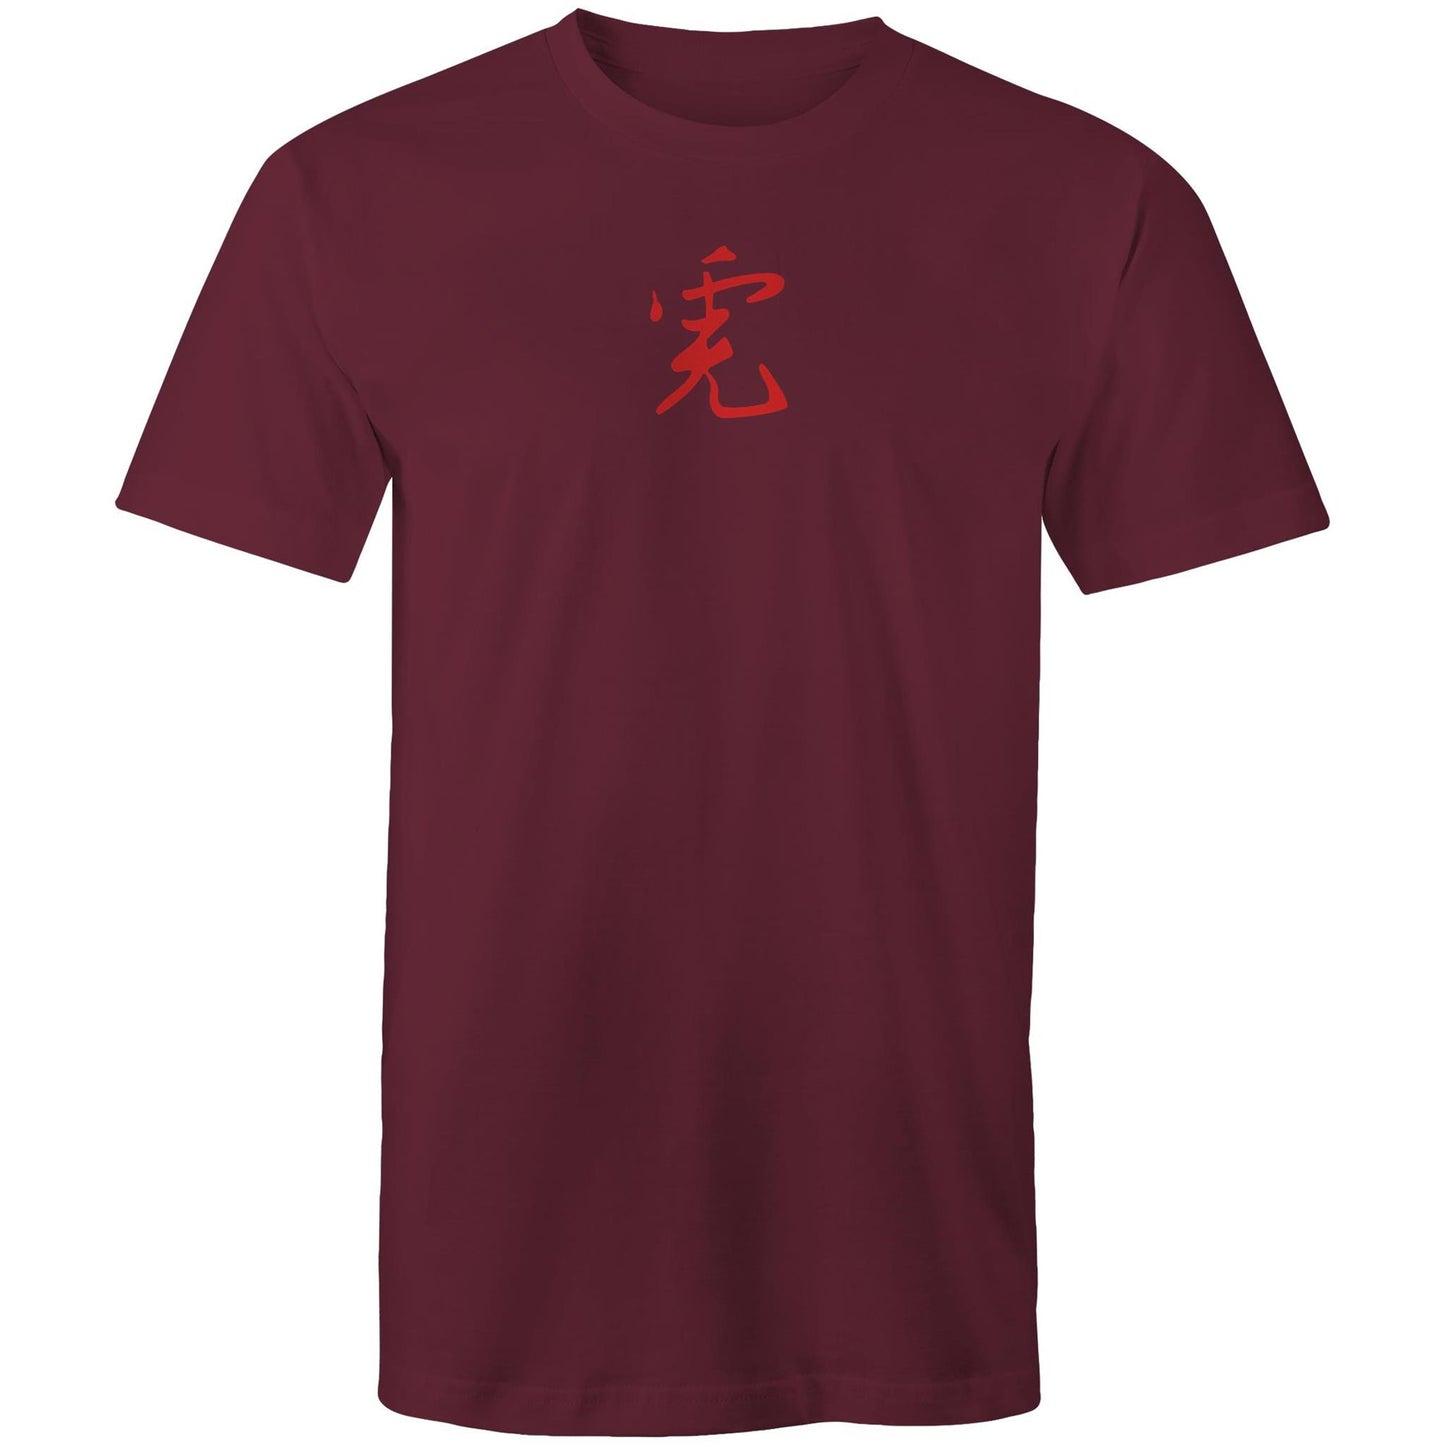 Year of the Tiger T Shirts for Men (Unisex)